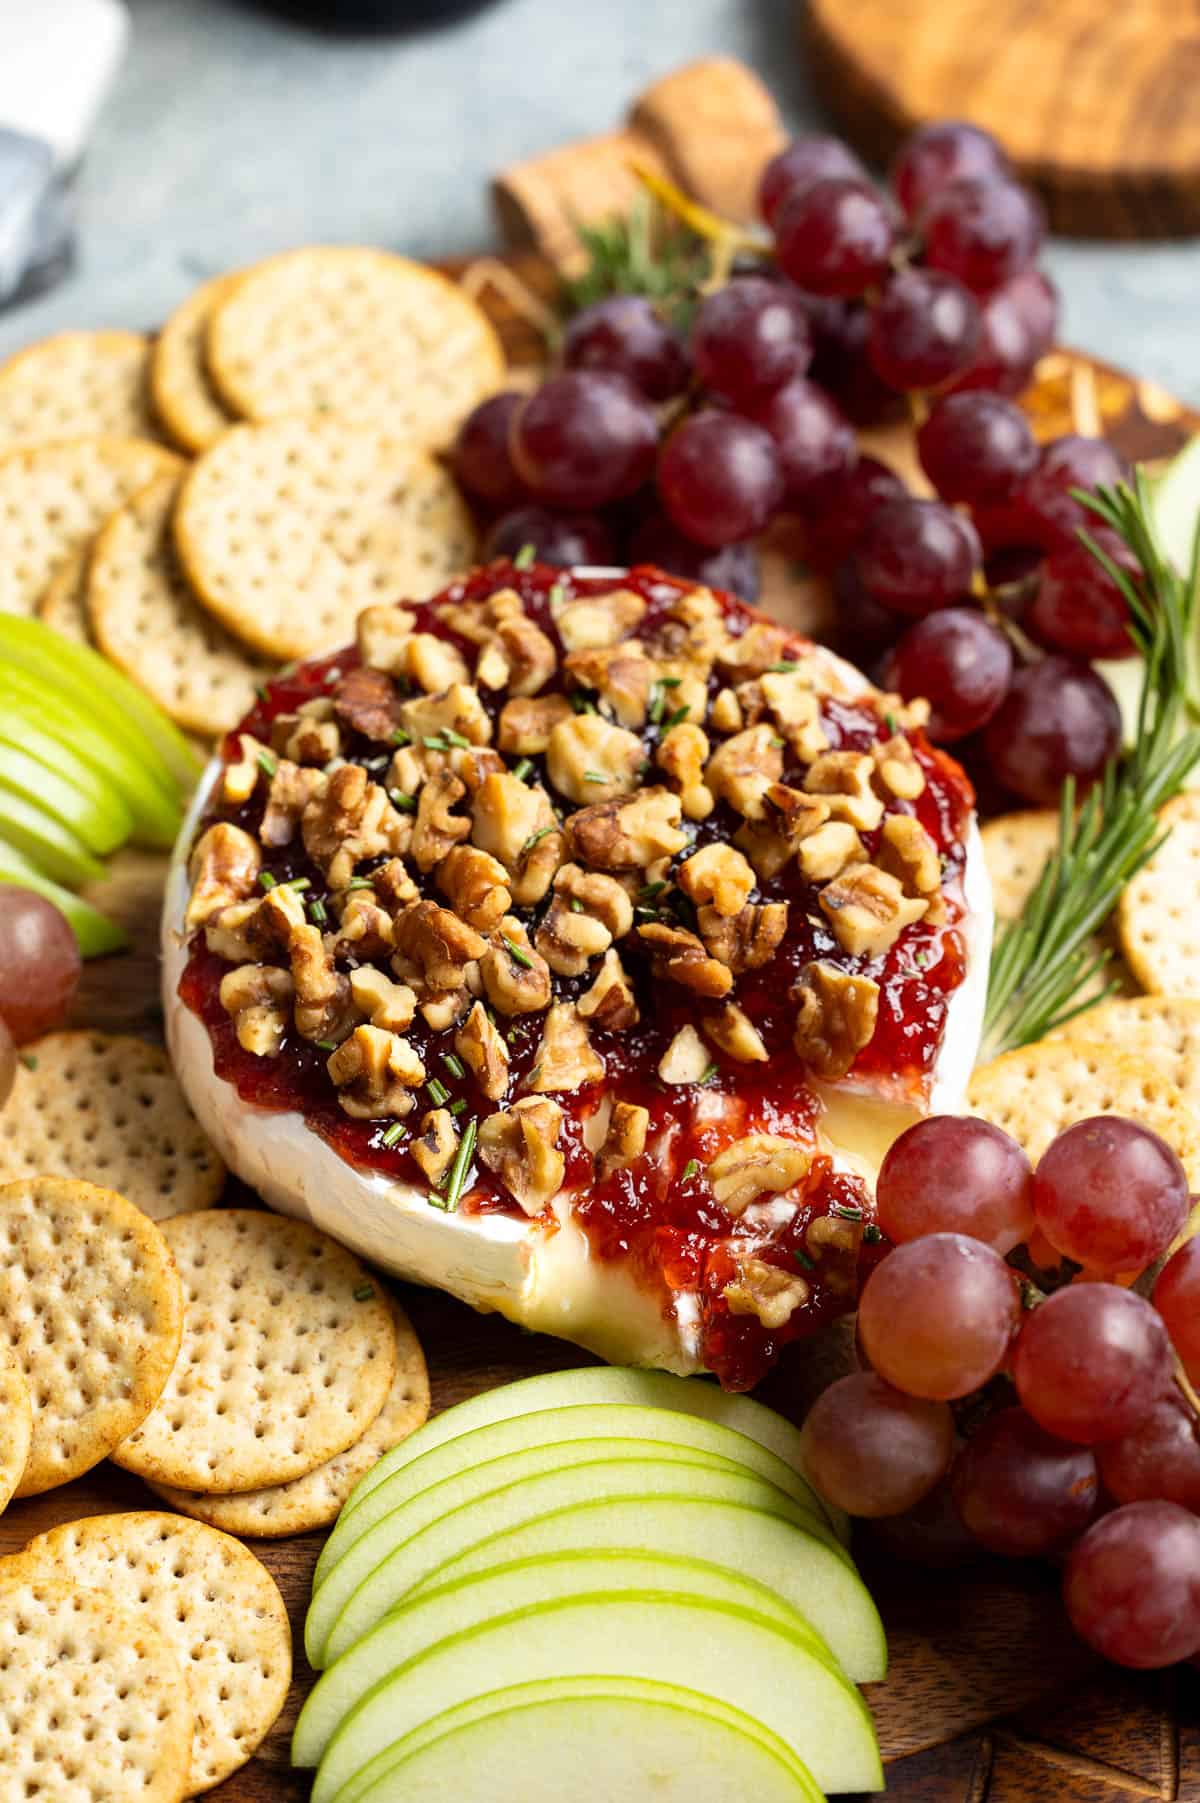 A wheel of gooey baked brie with jam partially cut into on an appetizer board.